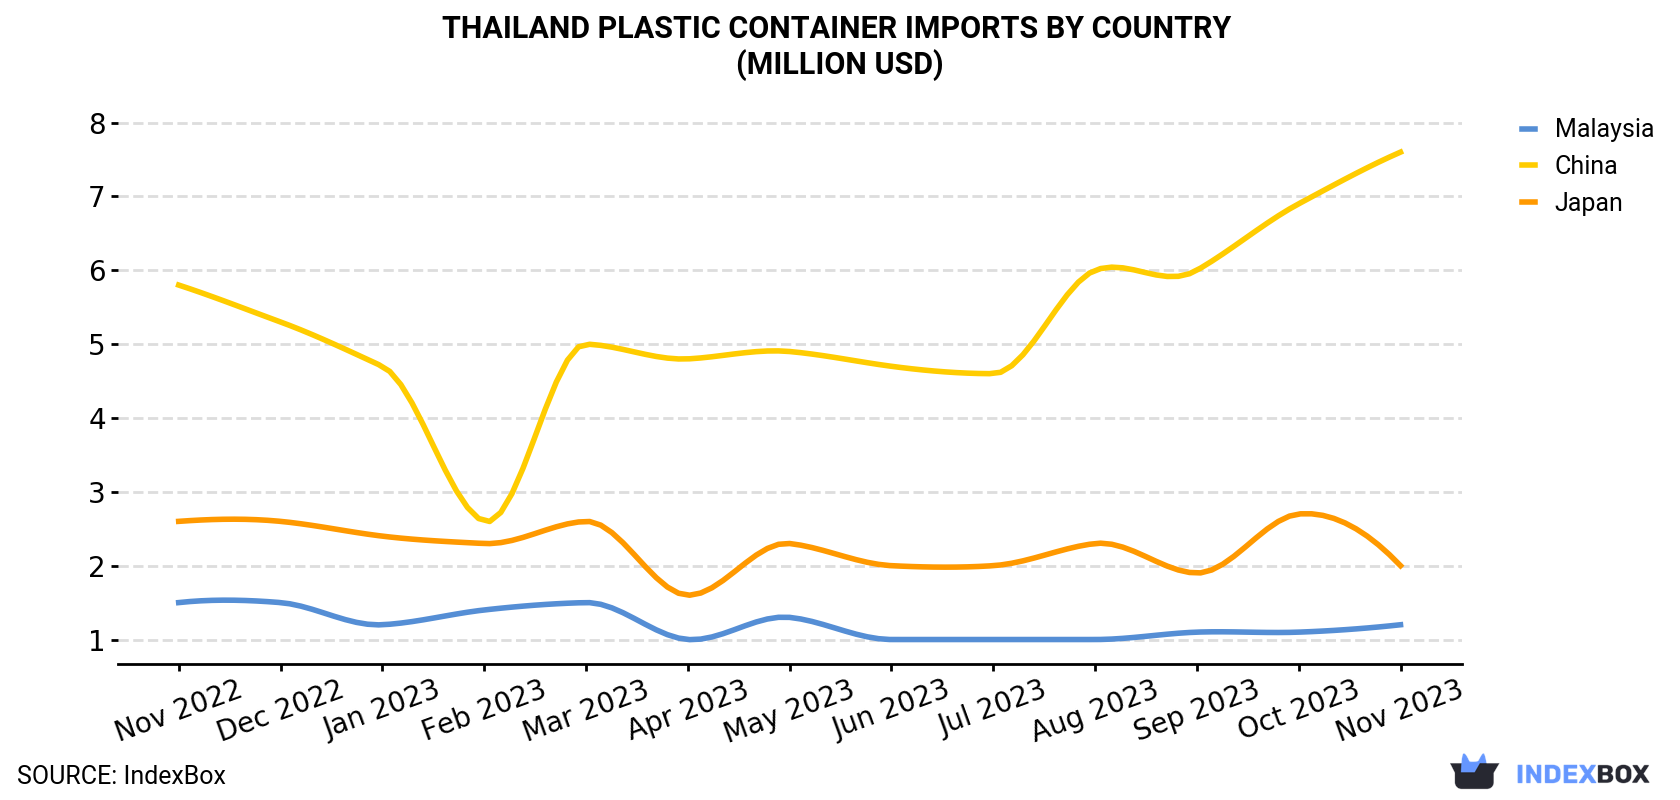 Thailand Plastic Container Imports By Country (Million USD)